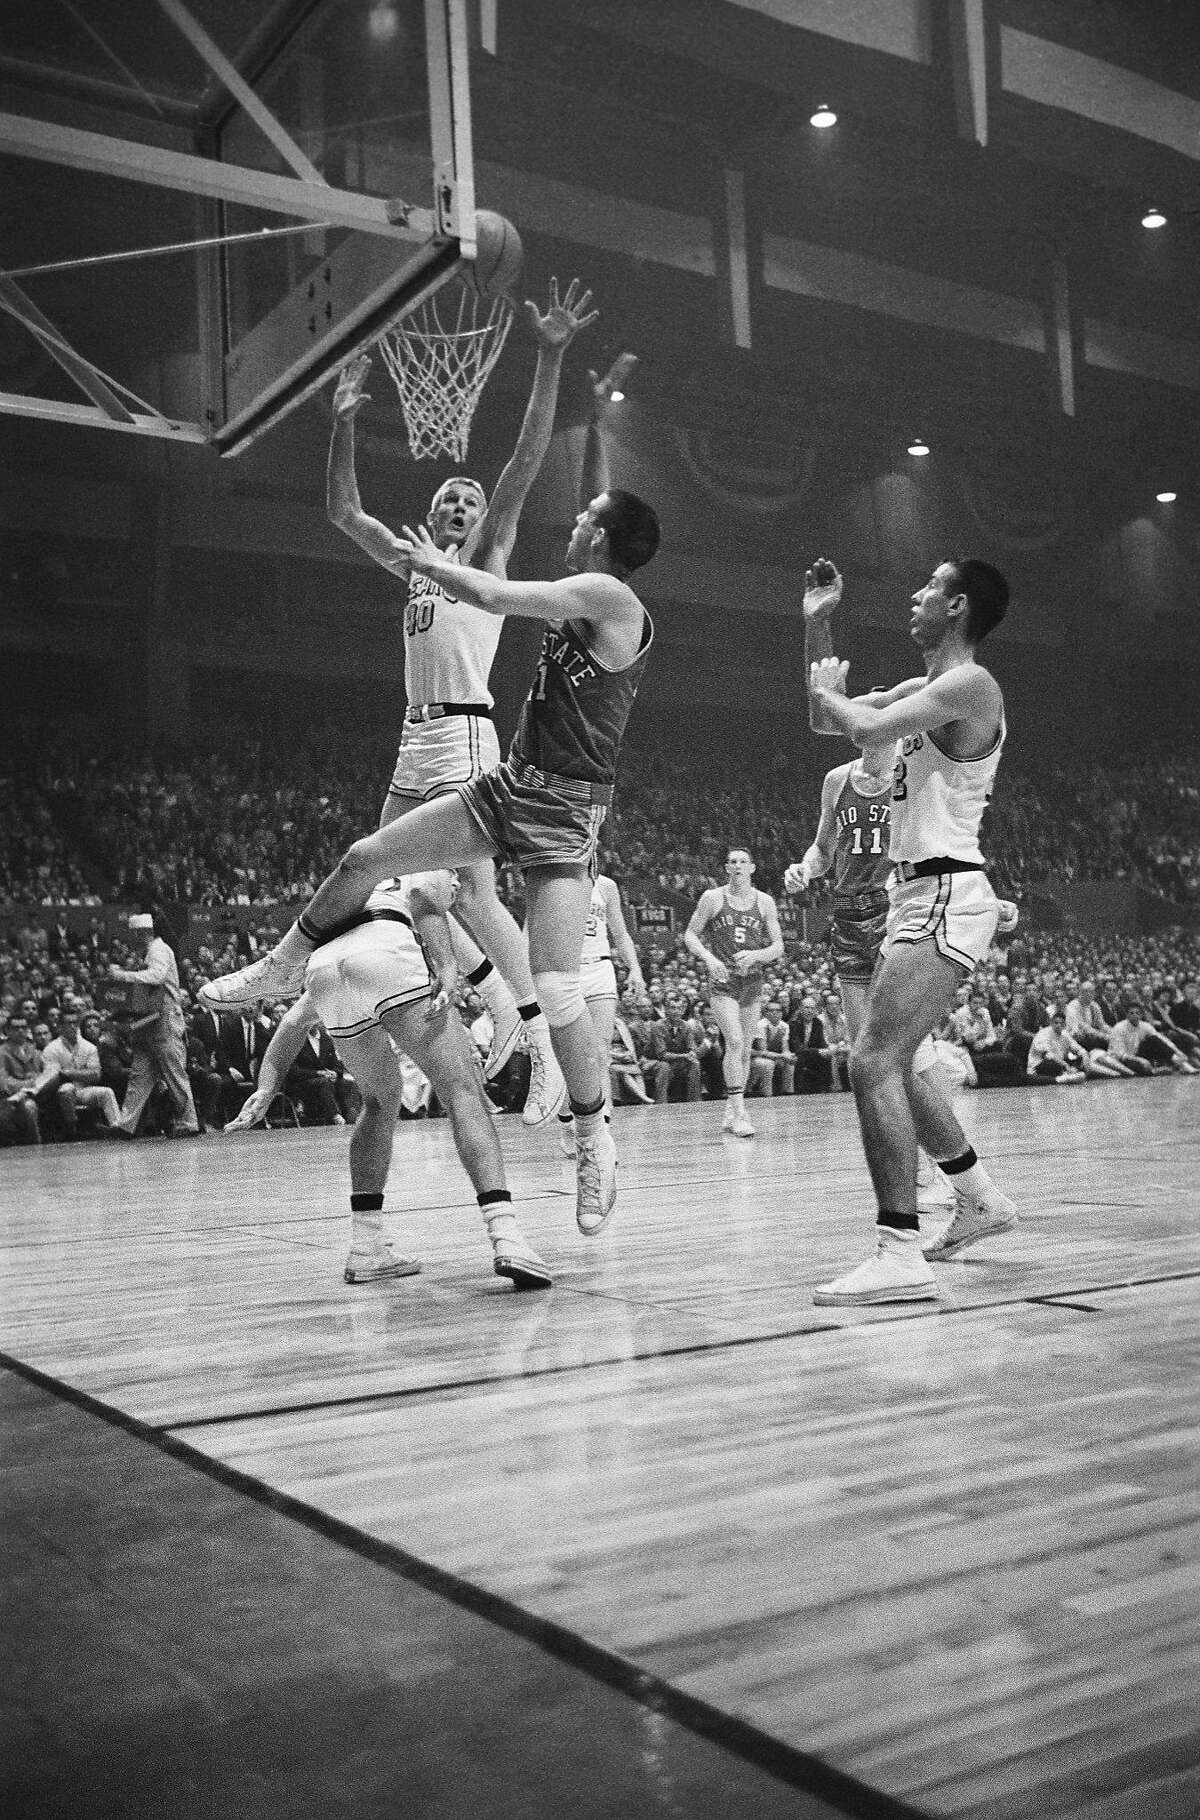 (Original Caption) With one leg draped over an unidentified player, Ohio State's Larry Sigfried (21) fires and scores from beneath the basket in the NCAA Championship game with California here on March 19th. Making a vain effort to block the shot is California's Darrall Imhoff, (40). At right is California's Iandy Gillis. Ohio State swamped California 75-55.